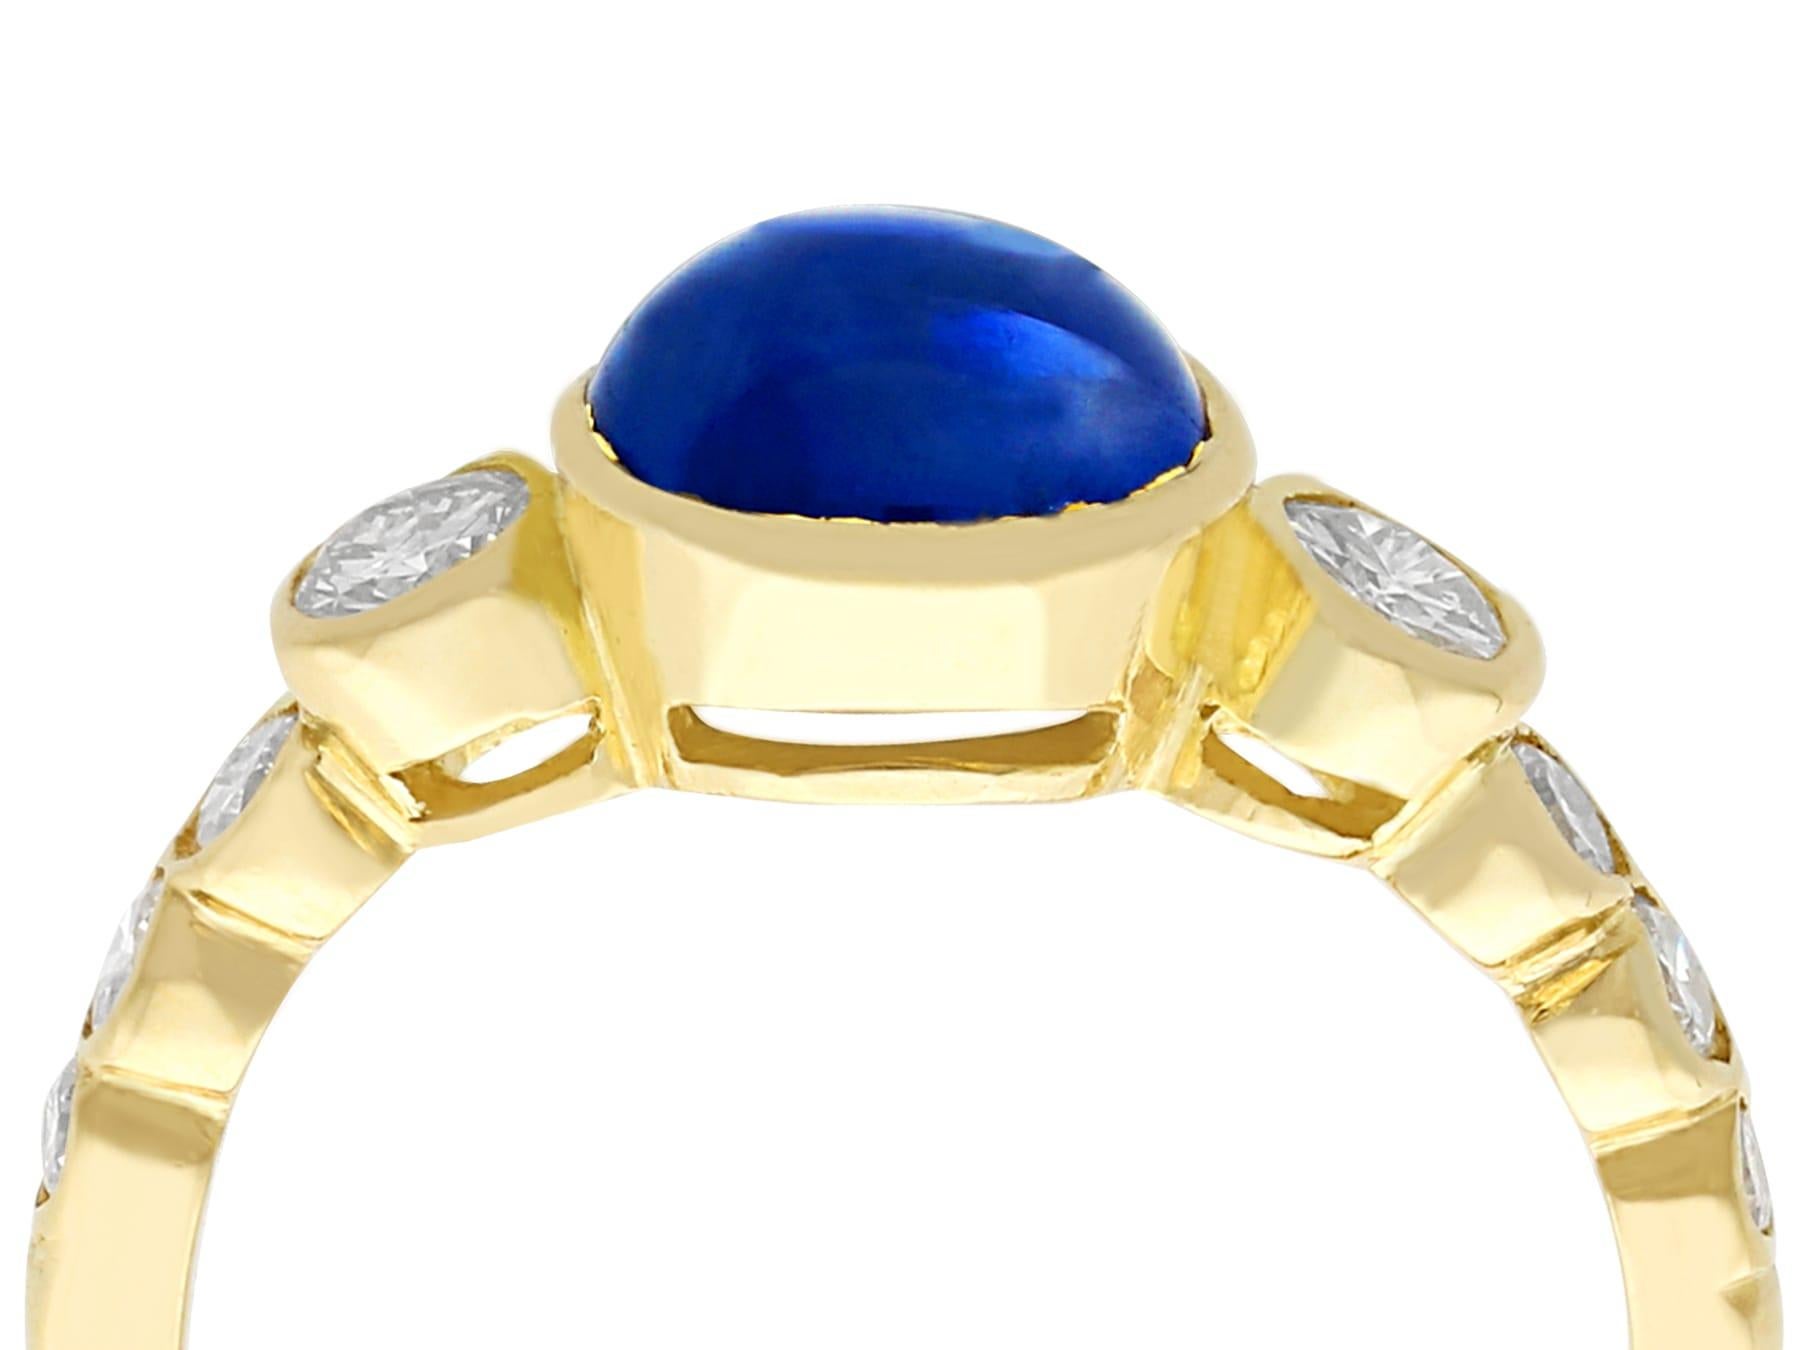 An impressive vintage 1.74 Ct sapphire and 0.57 Ct diamond, 18k yellow gold cocktail ring; part of our diverse antique jewelry and estate jewelry collections.

This fine and impressive sapphire cabochon cut ring with diamonds has been crafted in 18k